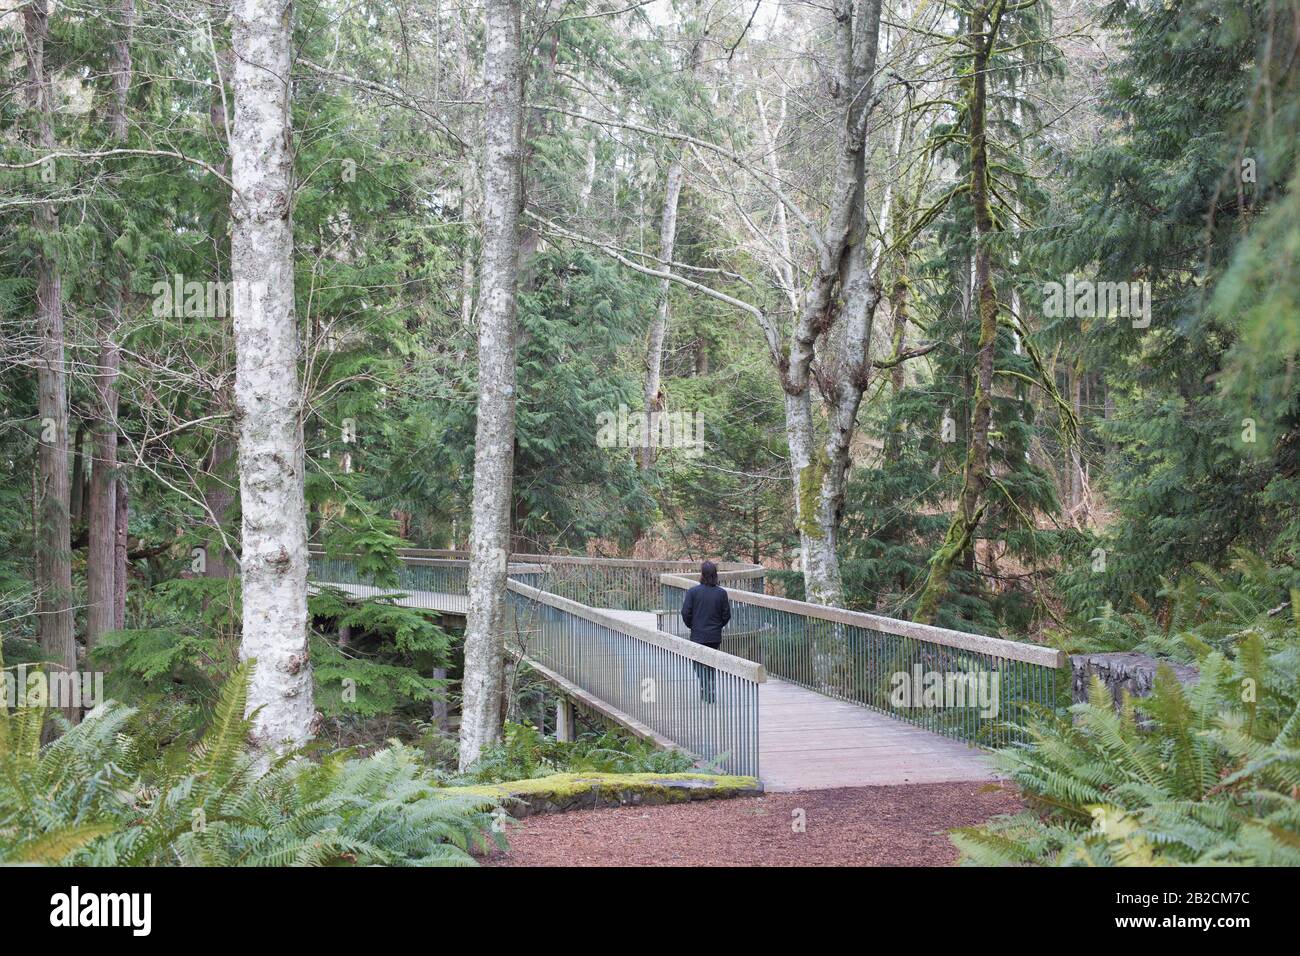 images photography - Alamy 4 Page - hi-res man walking and stock Solo